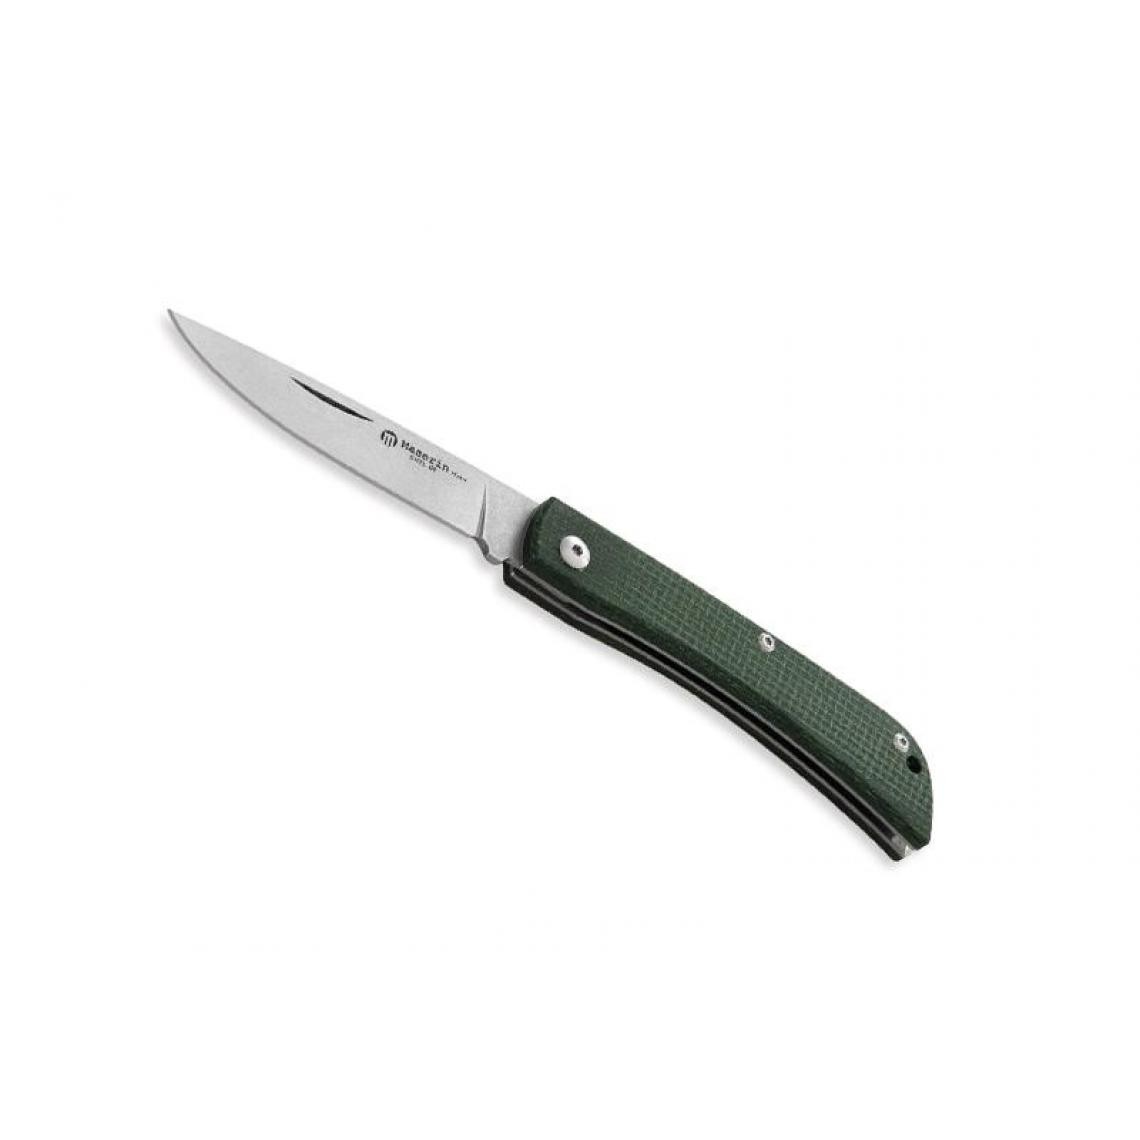 Maserin - MASERIN - 163.MV - COUTEAU MASERIN SCOUT MICARTA VERT - Outils de coupe